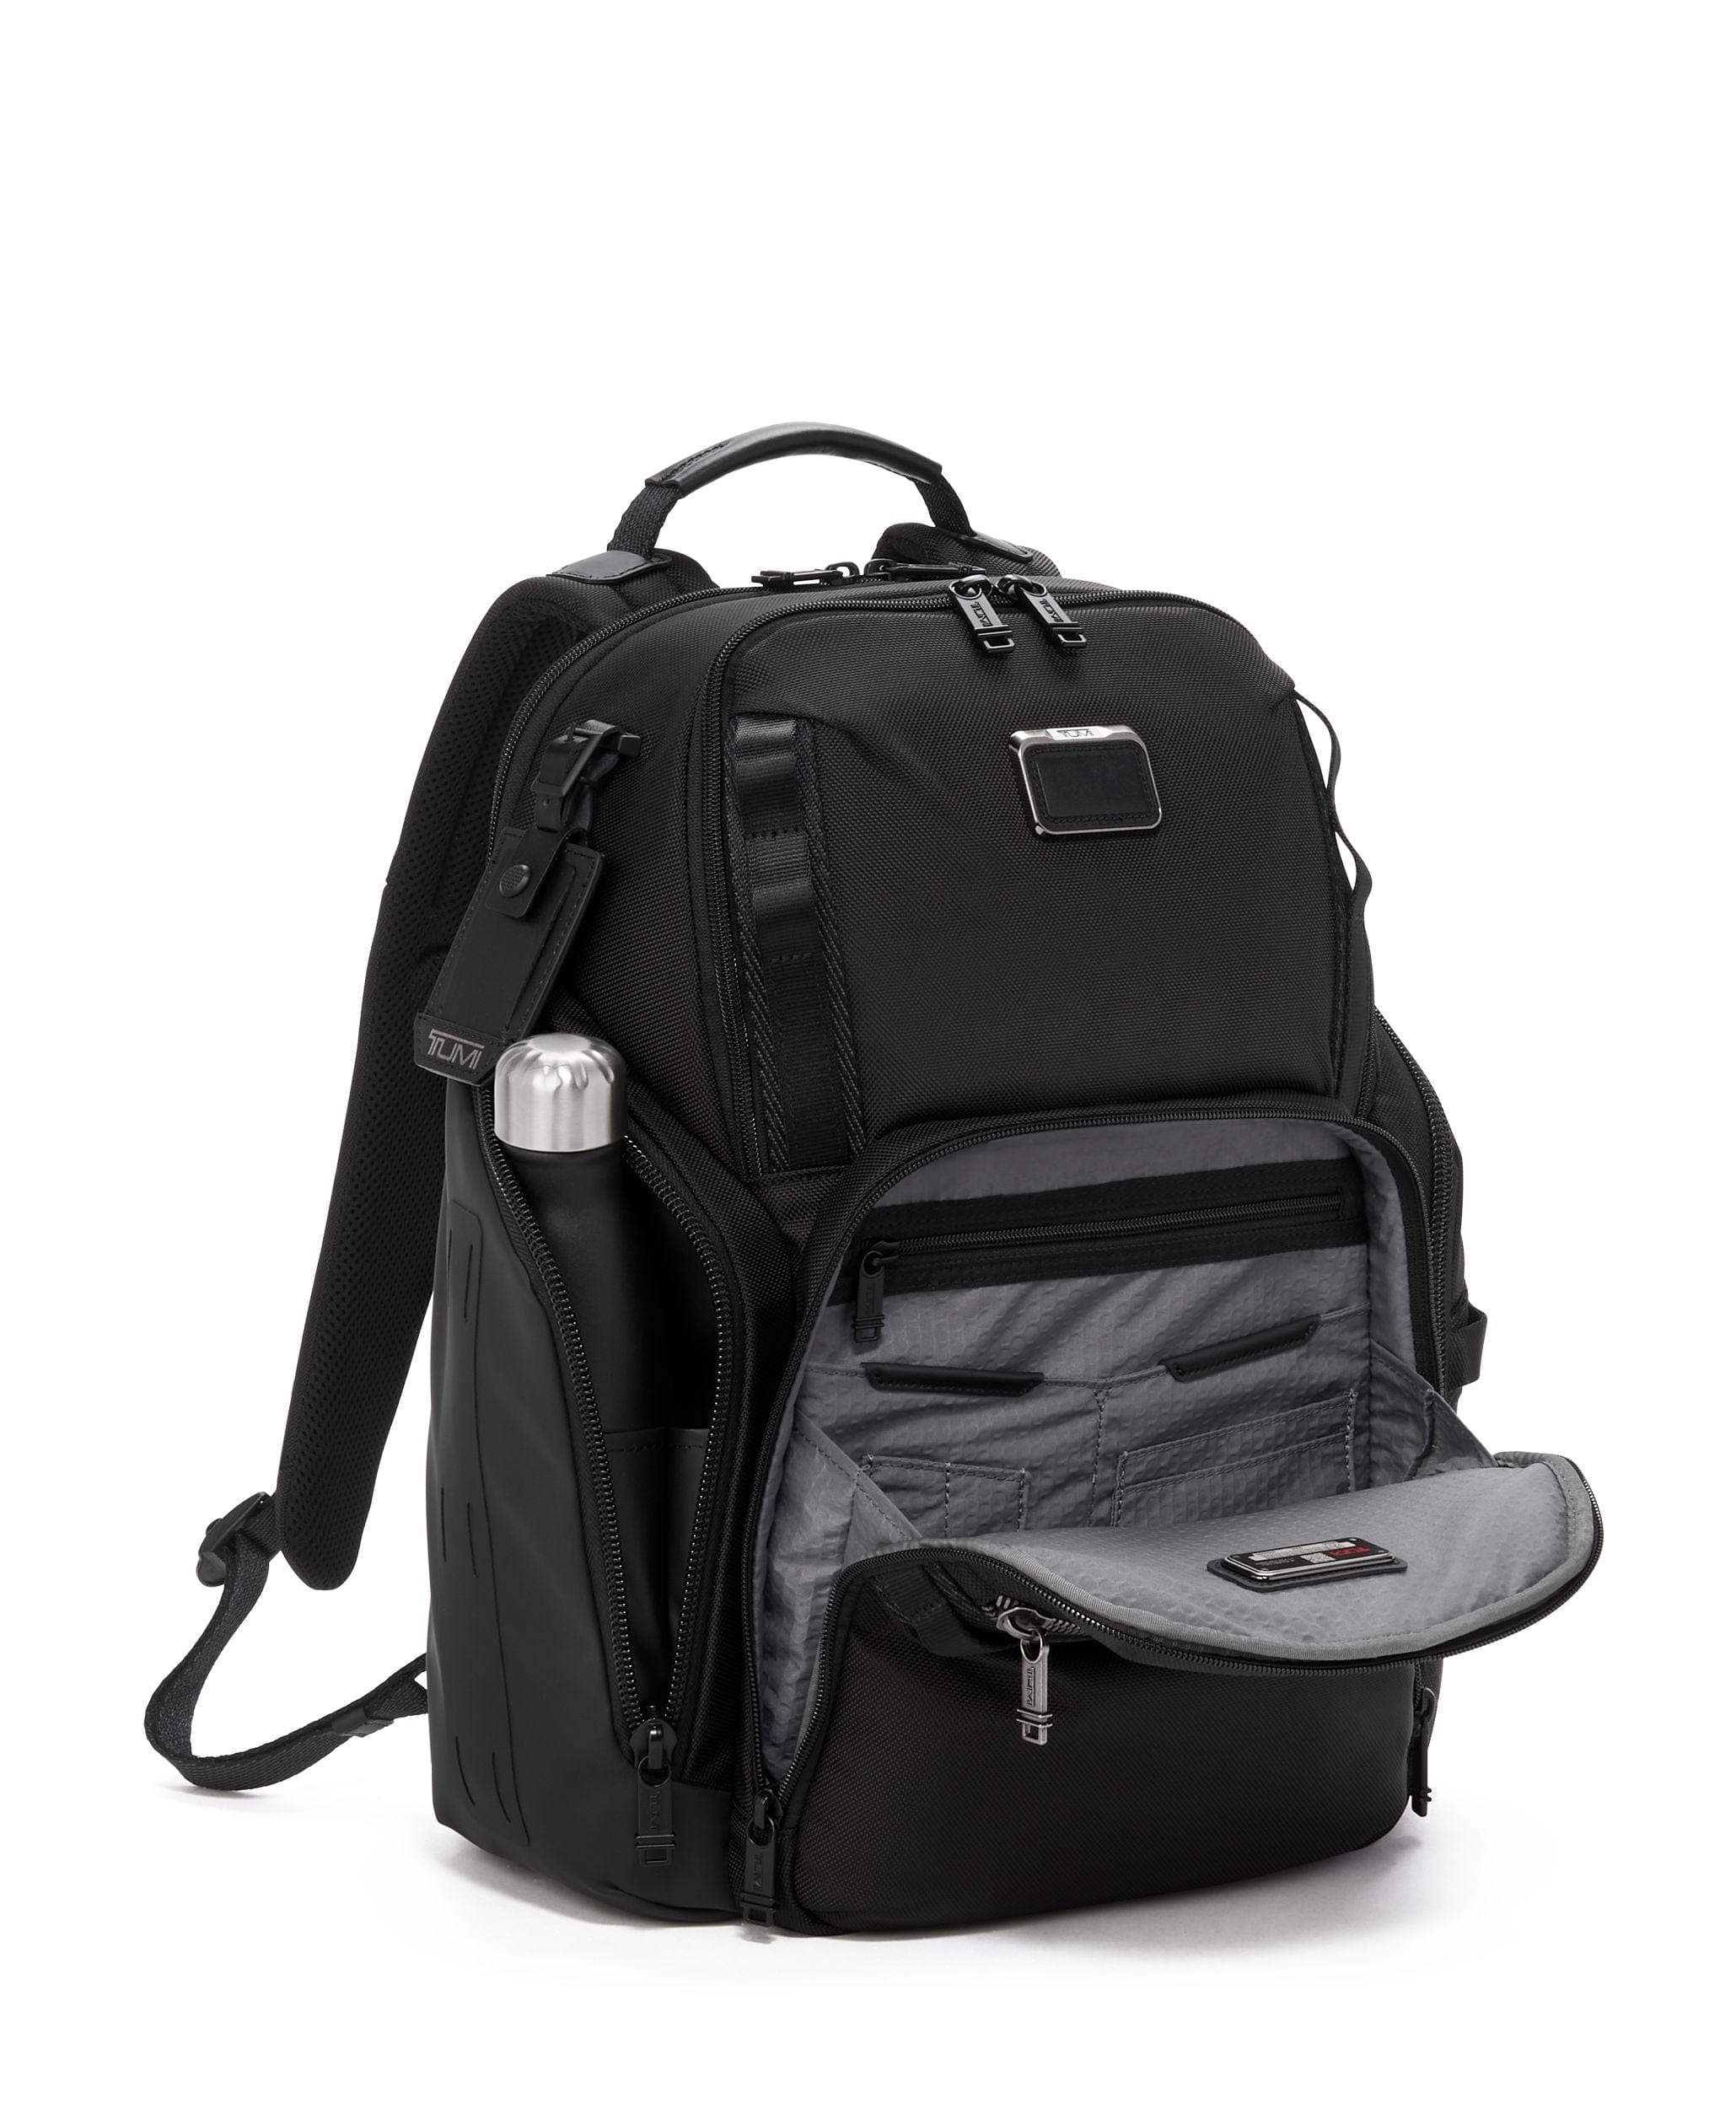 Shop Search Backpack by TUMI UAE - TUMI